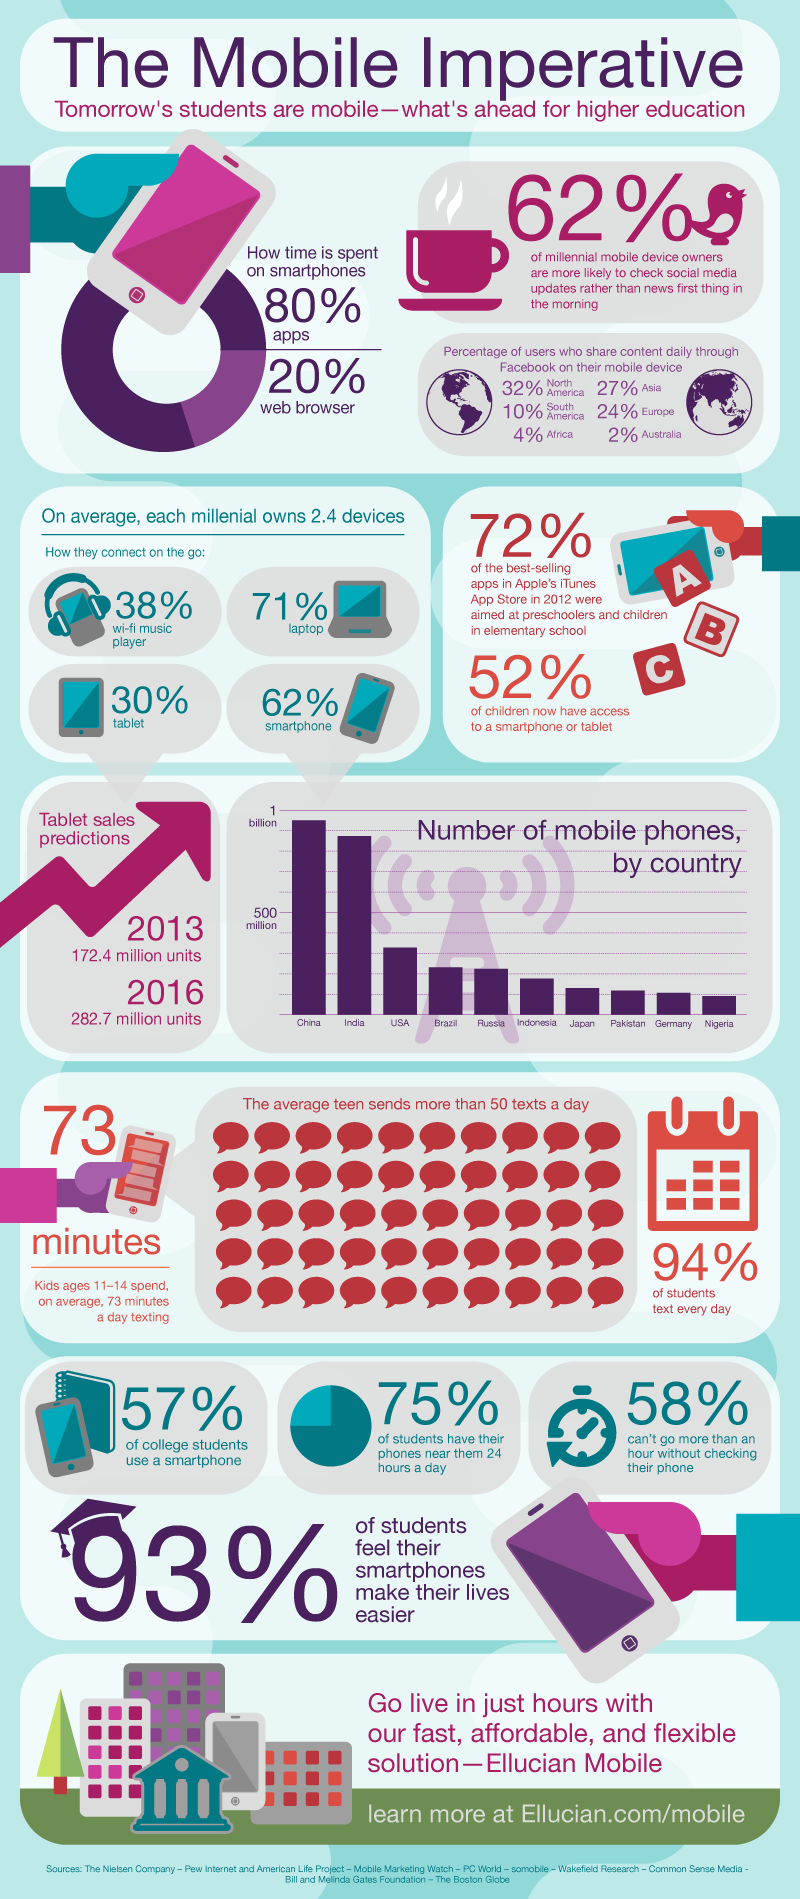 Mobile Learning in Higher Education Infographic